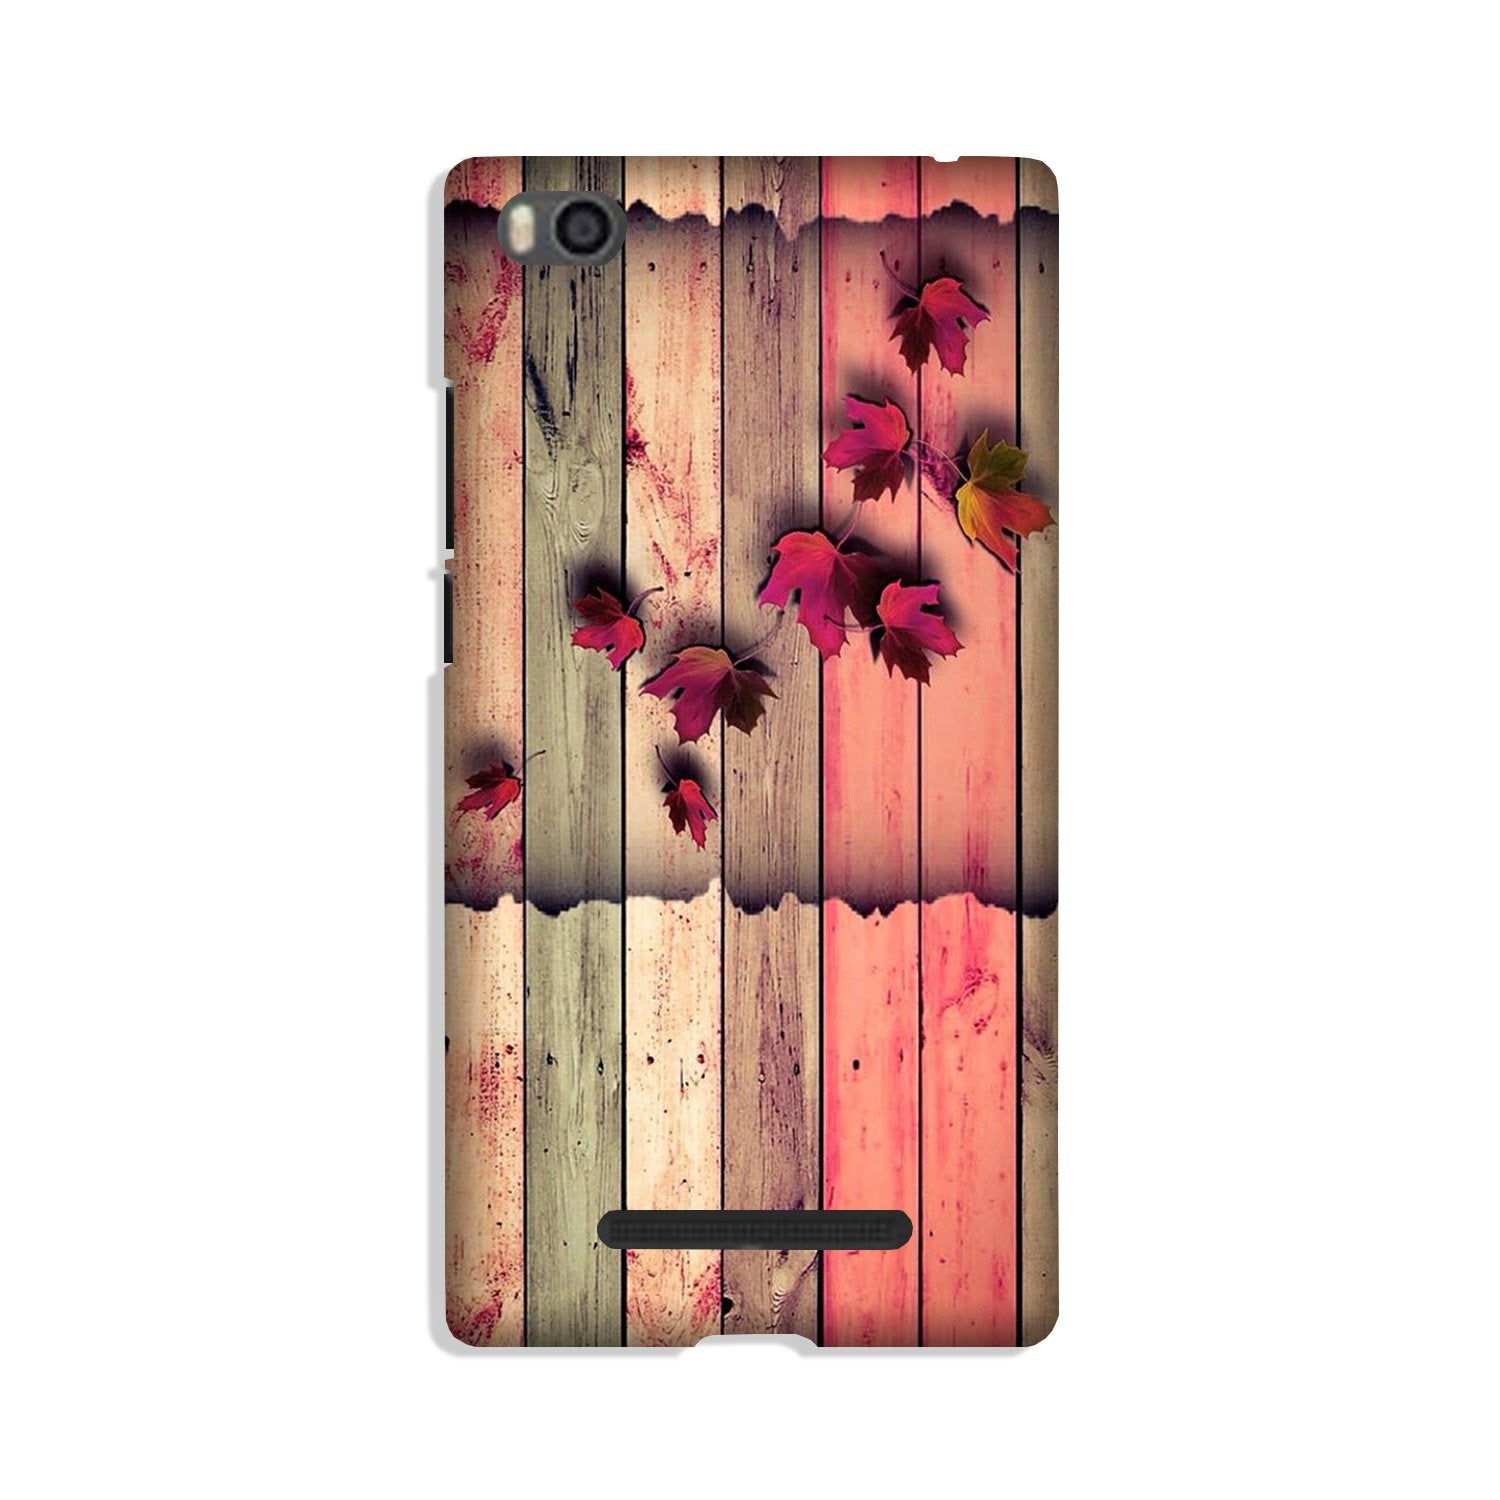 Wooden look2 Case for Redmi 4A